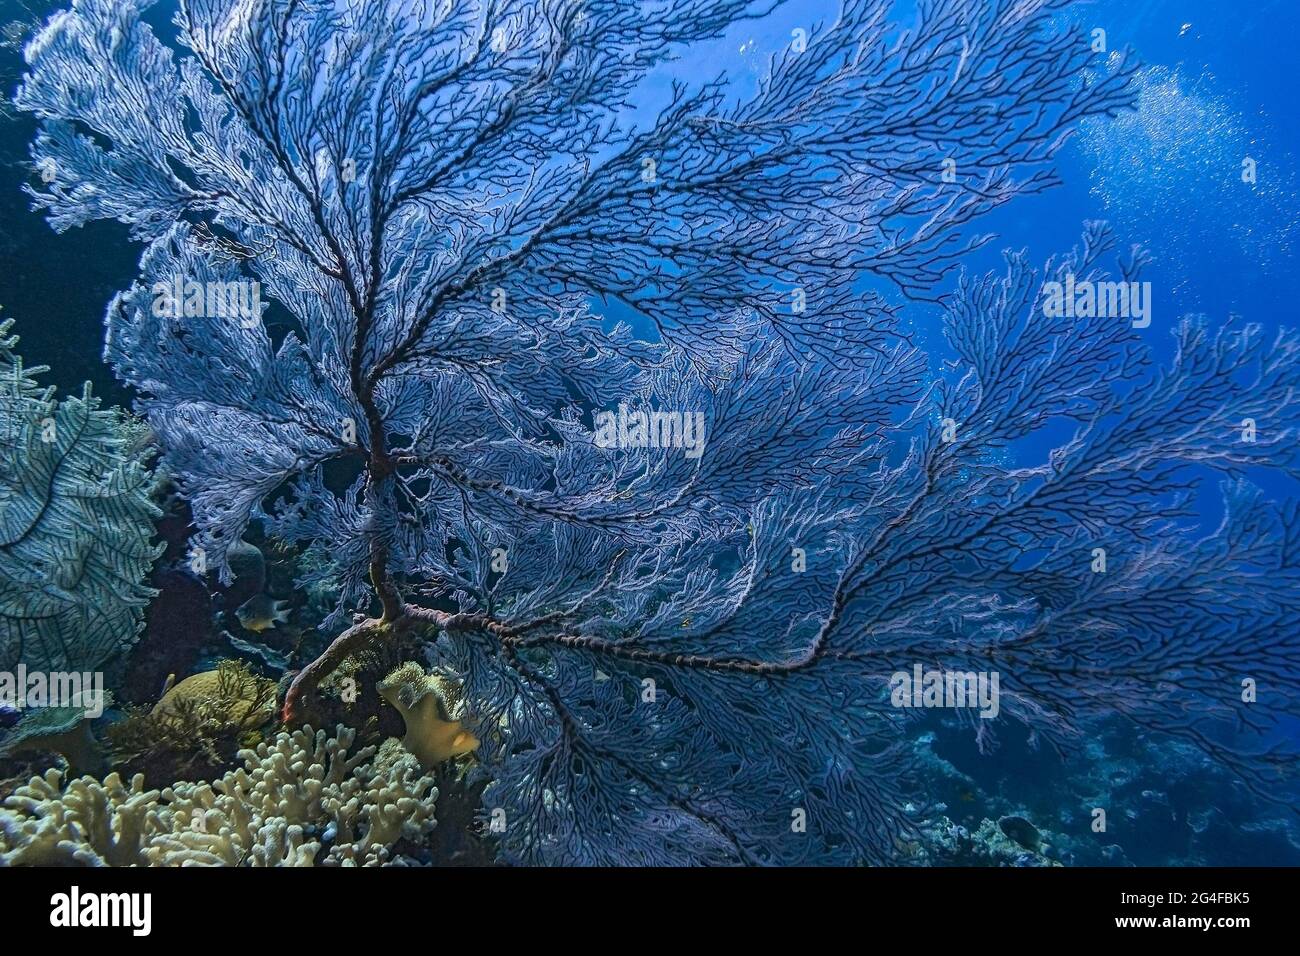 Knotted fan coral (Melithaea ochracea) with diver, Wakatobi Dive Resort, Sulawesi, Indonesia Stock Photo